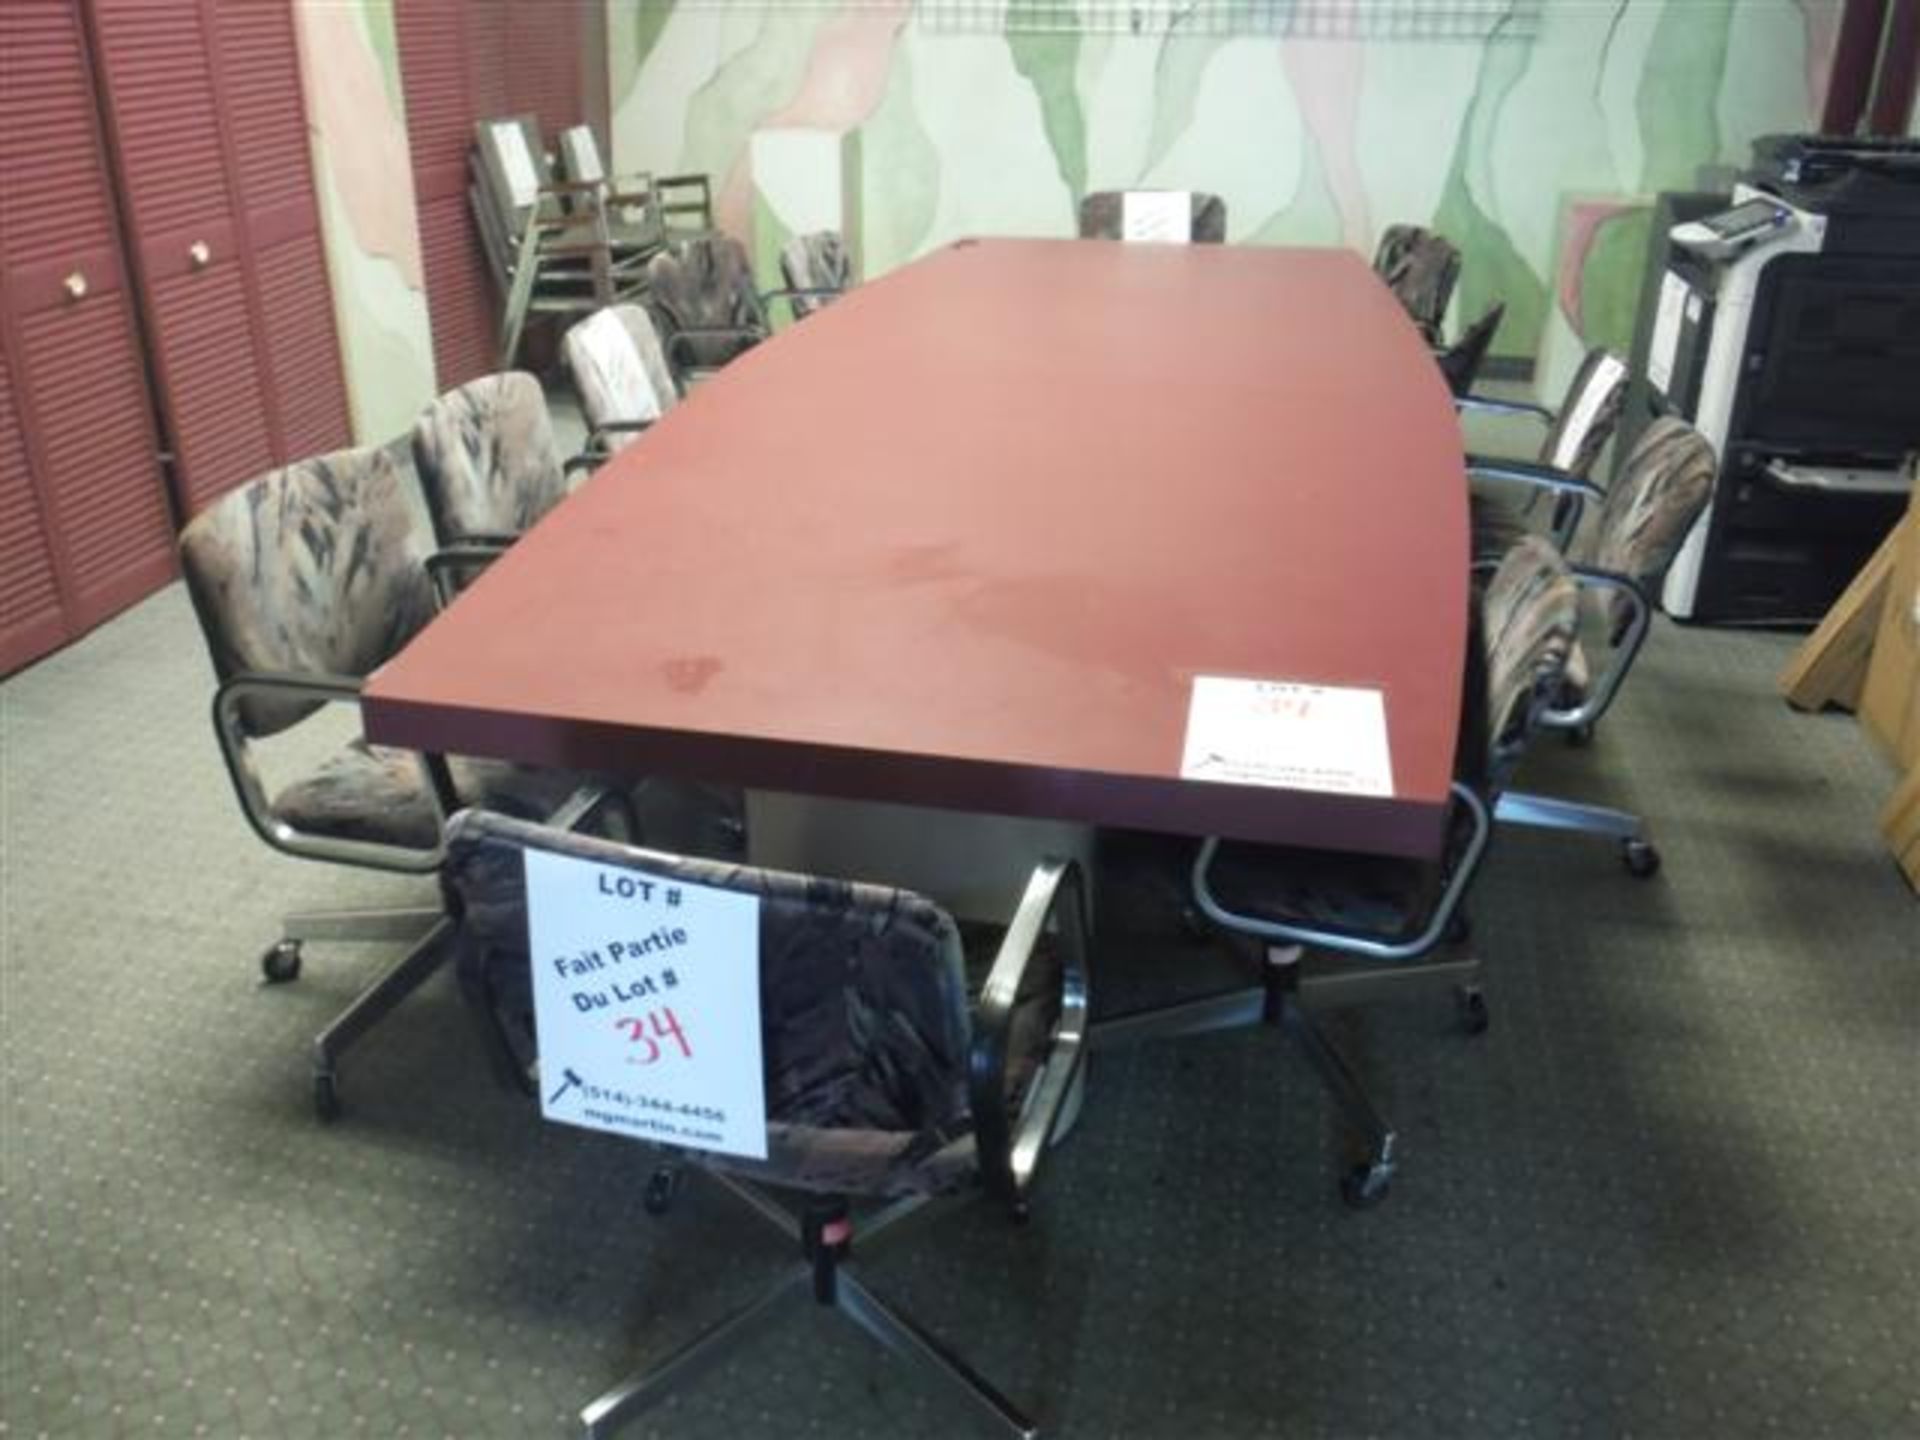 CONFERENCE TABLE W/ 12 CHAIRSSold as a lot